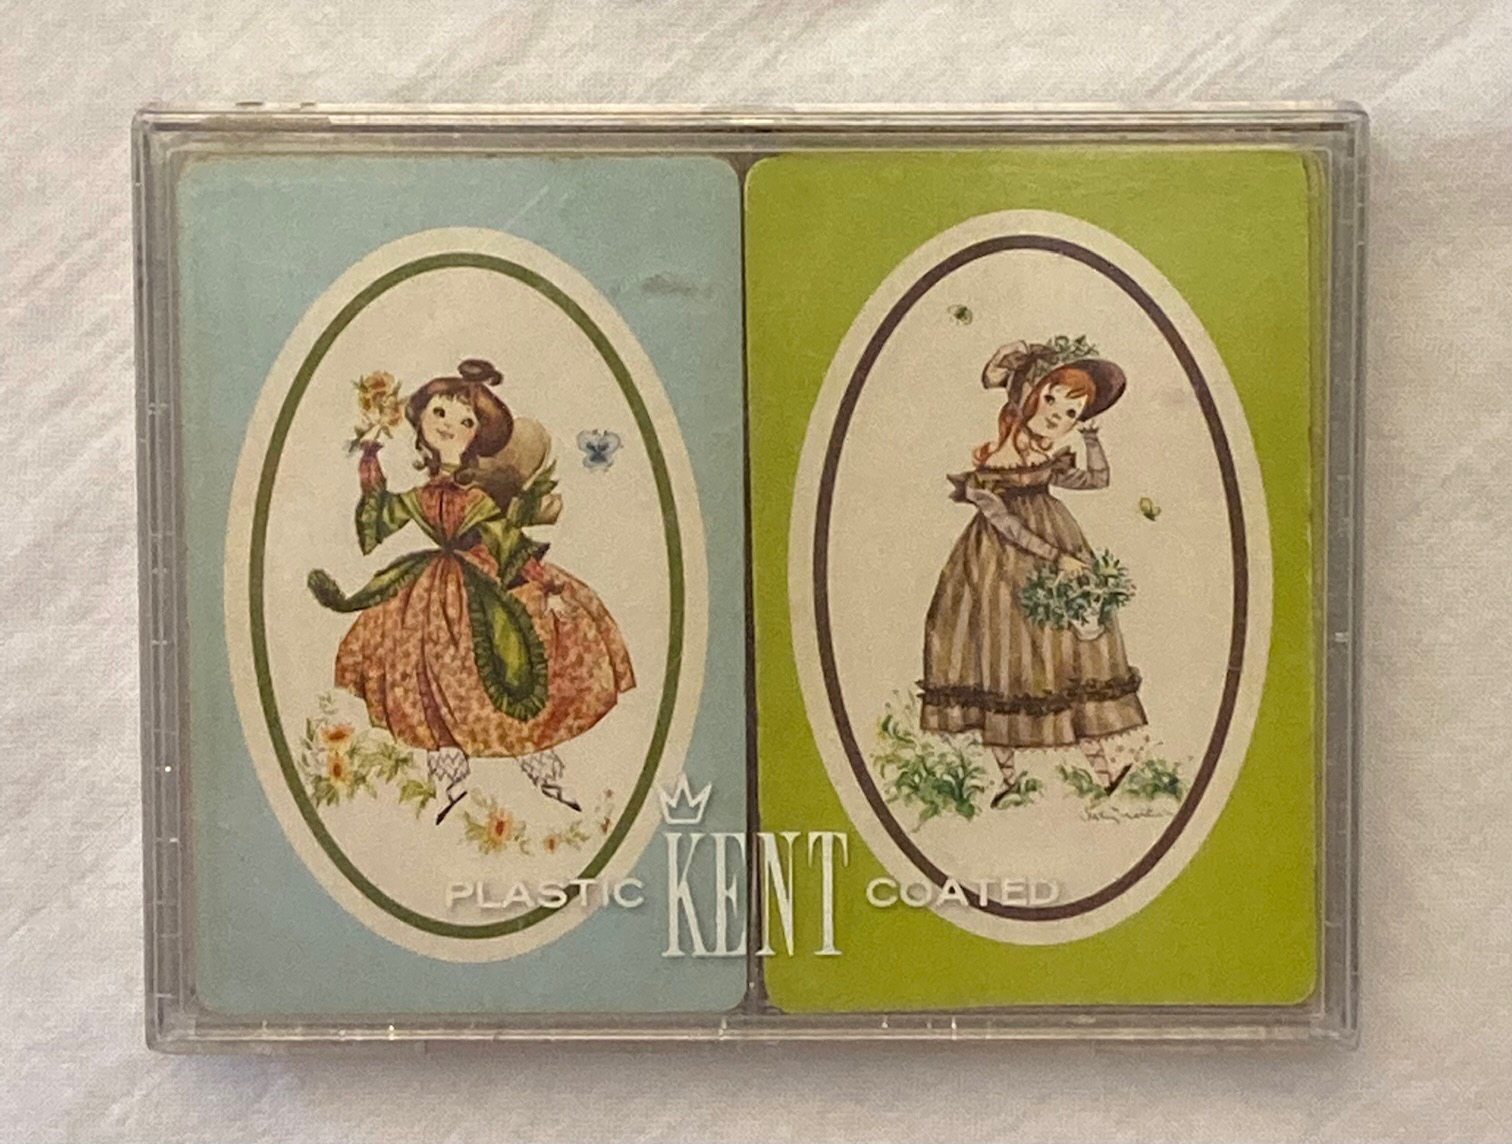 Vintage playing cards two decks in plastic box old fashioned girls Kent - $3.00